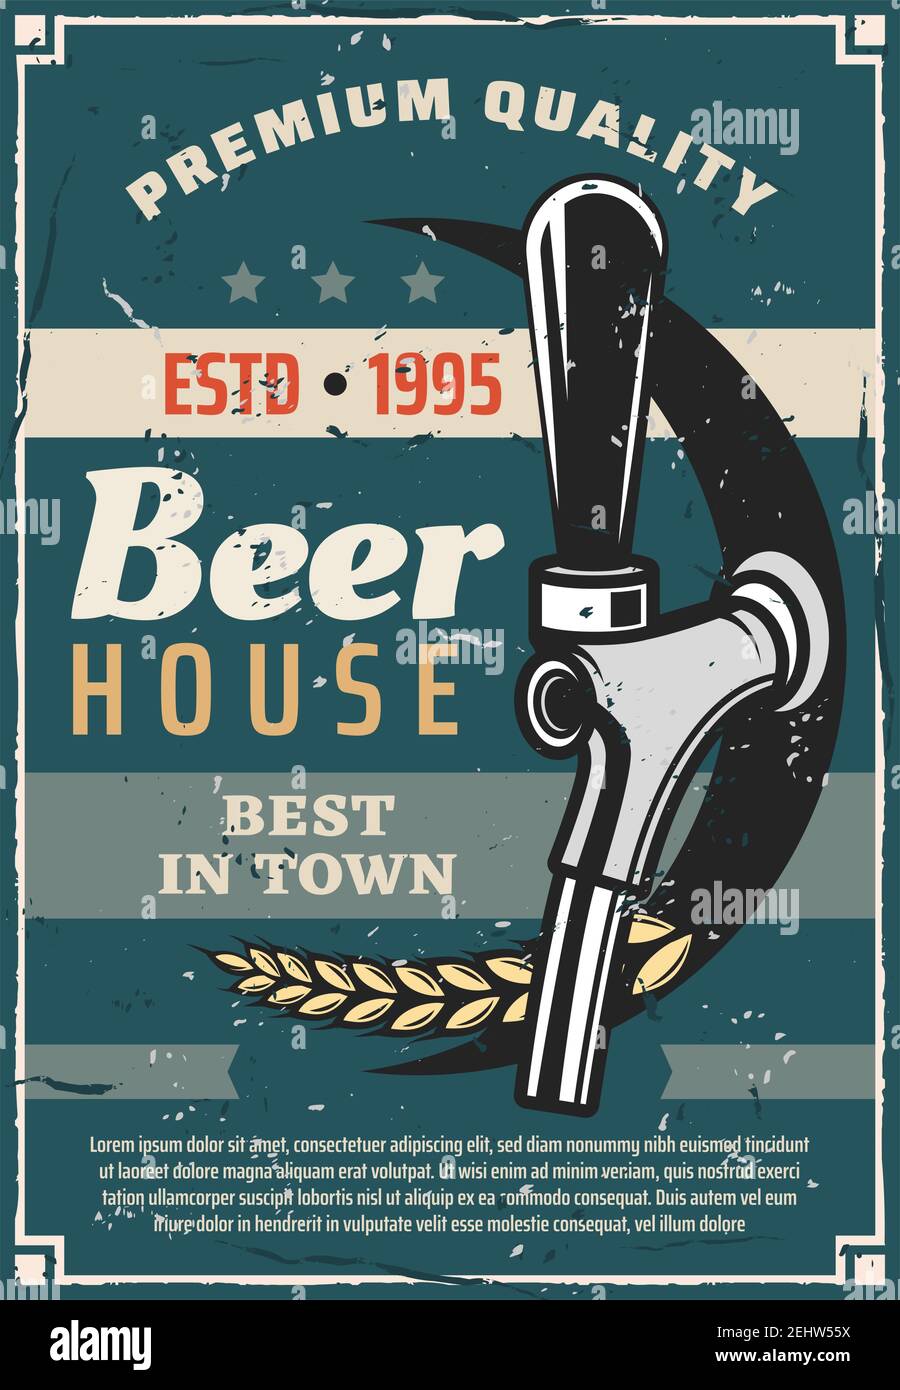 Beer house or craft brewery traditional production line retro poster. Vector vintage advertisement design of bar or pub tap with wheat for premium qua Stock Vector